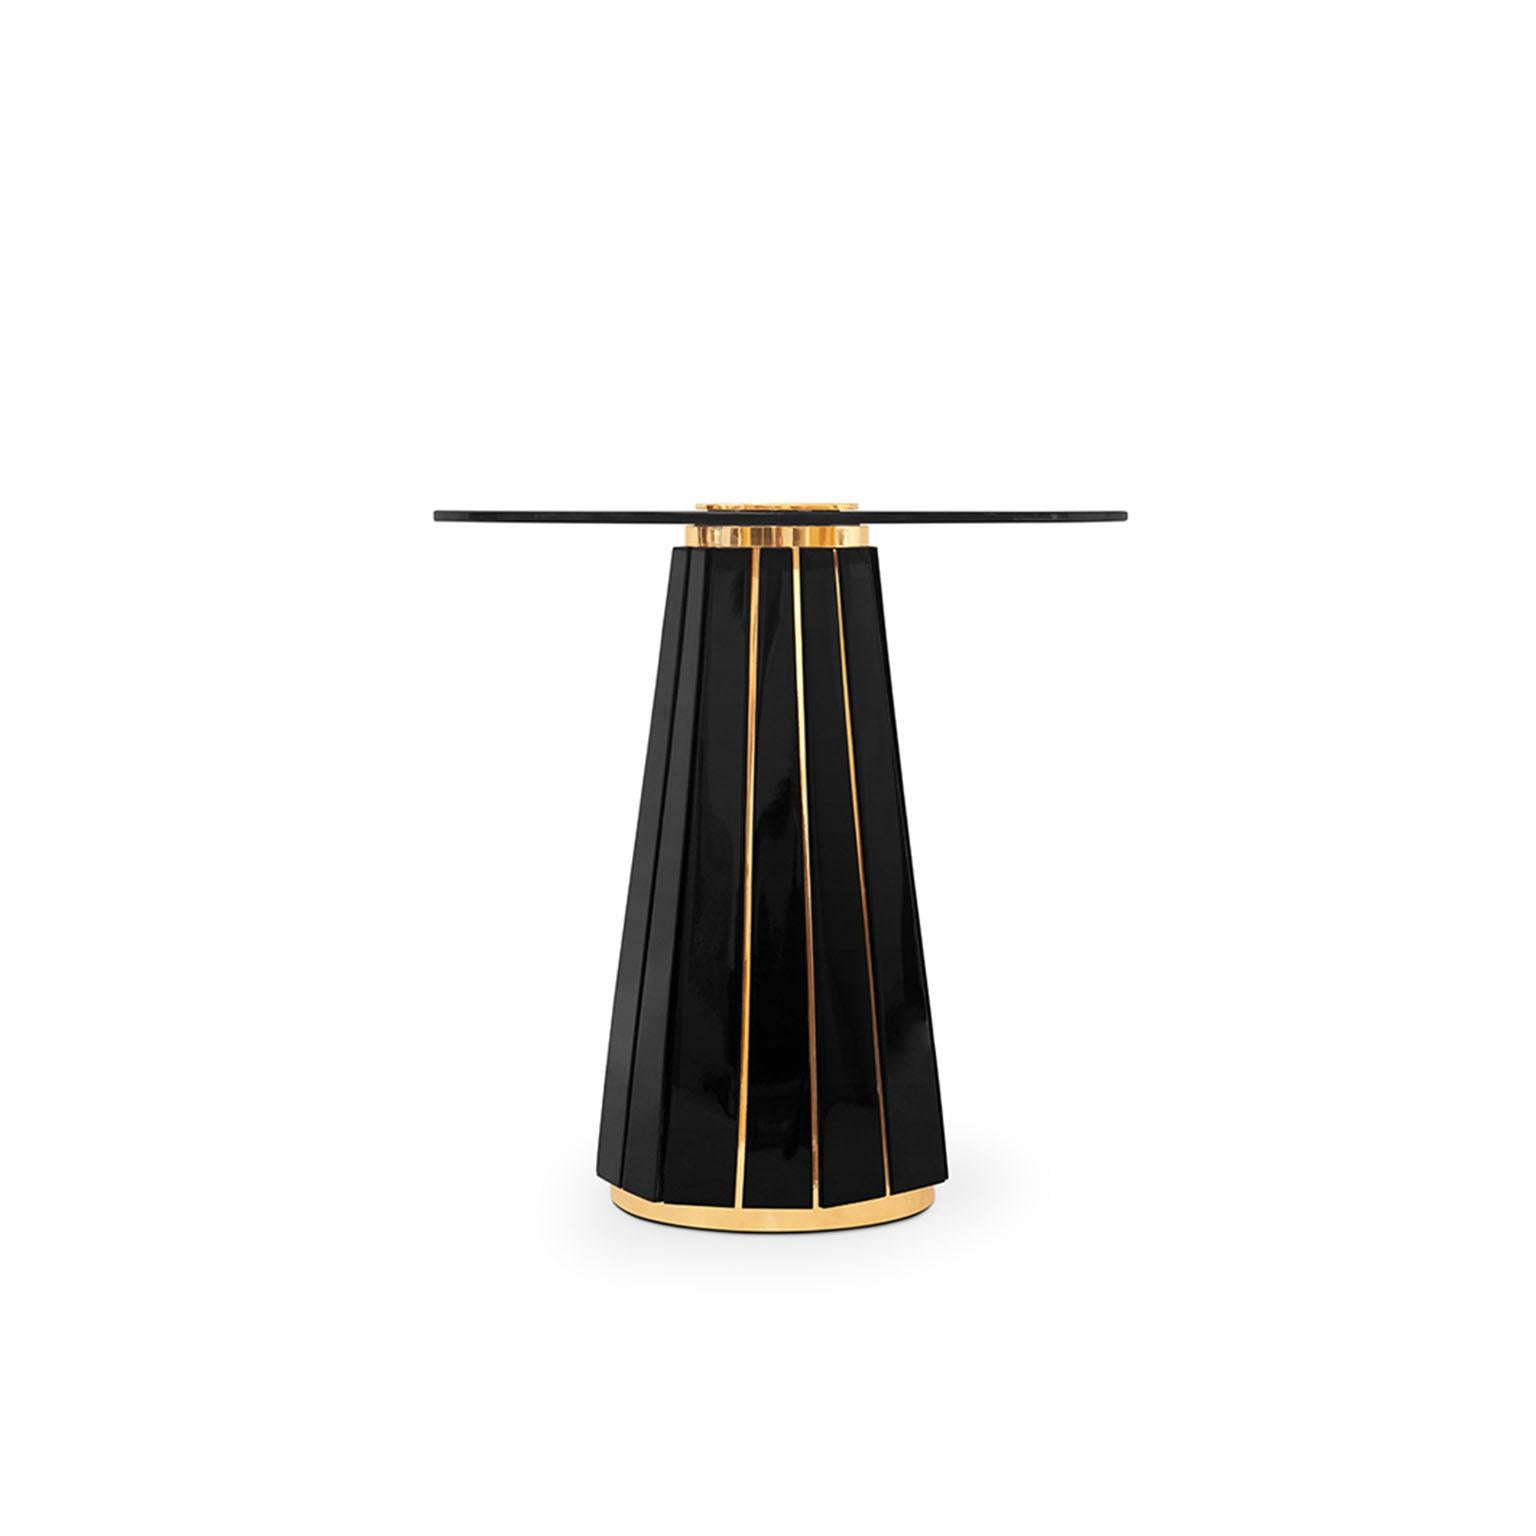 Inspired by our remarkable Darian sideboard, the Darian side table II rises has a luxurious side table, imponent and lavish. A ravishing handcraft side table, that is made of round smoked glass placed on top of a wooden structure in black lacquer